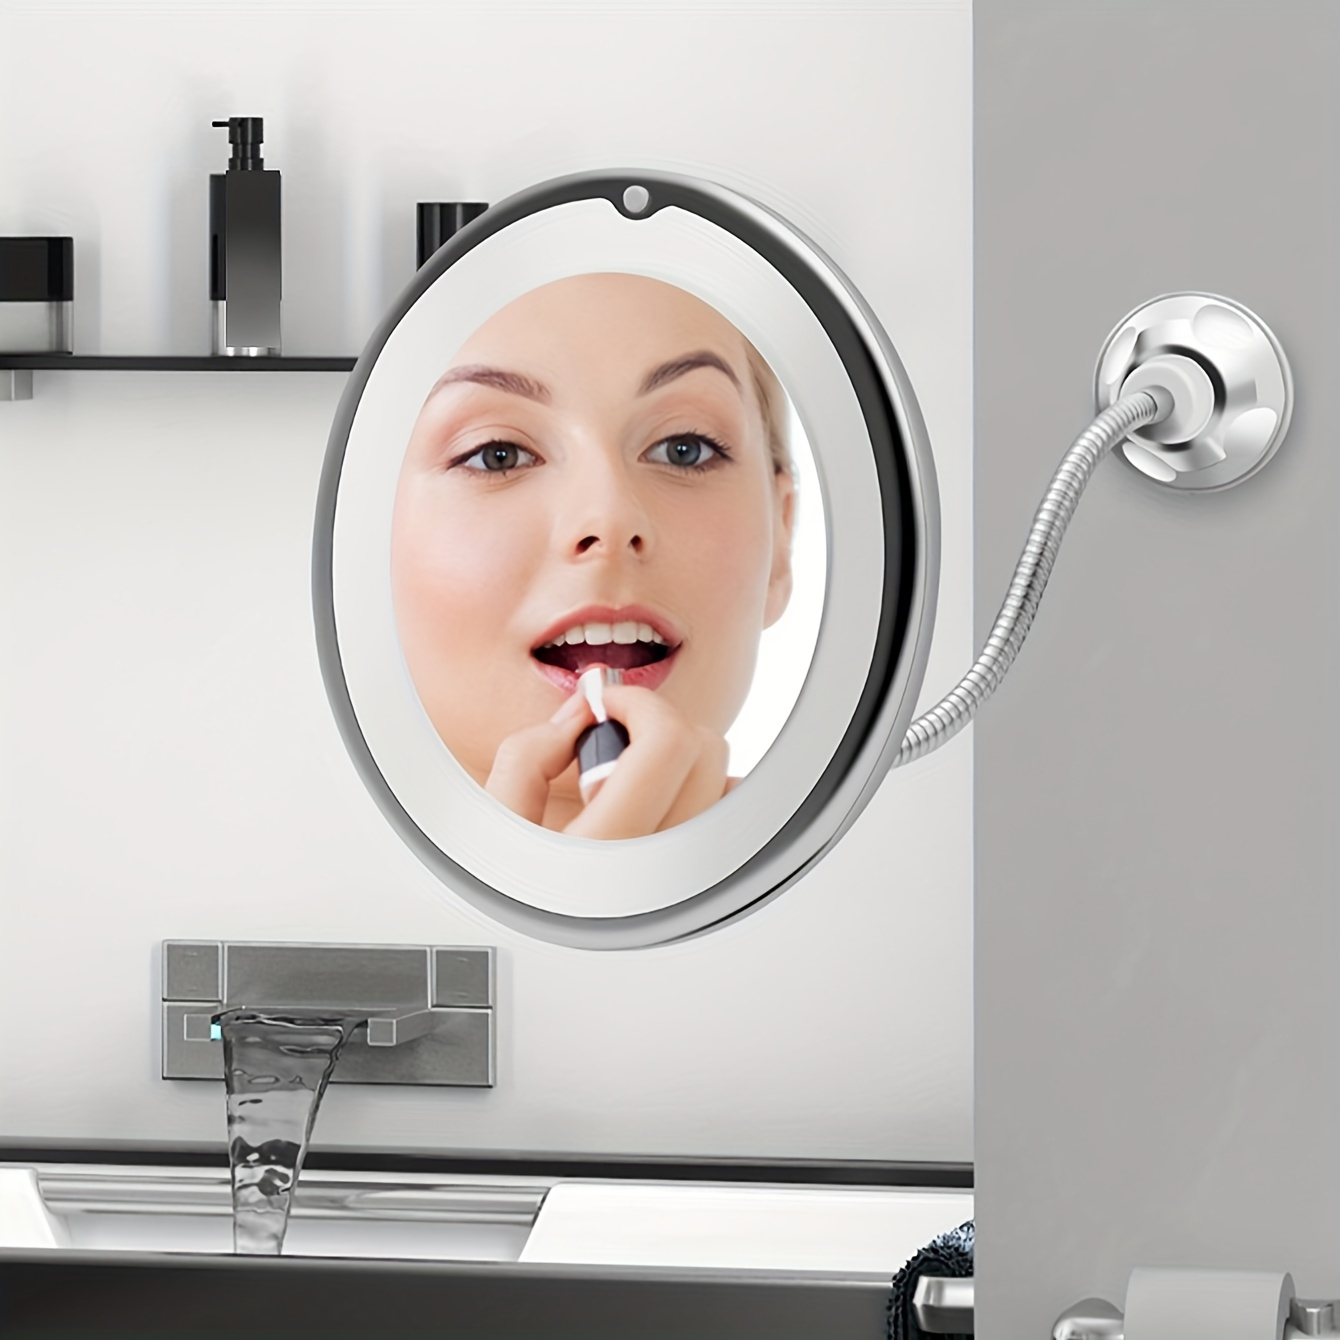 

Flexible 10x Magnifying Suction Mirror, Led Lighted Vanity Mirror, Power Locking Suction Cup With Day Light And 360 Degree Swivel, Portable Vanity Mirror For Home Bathroom (excluding Batteries)